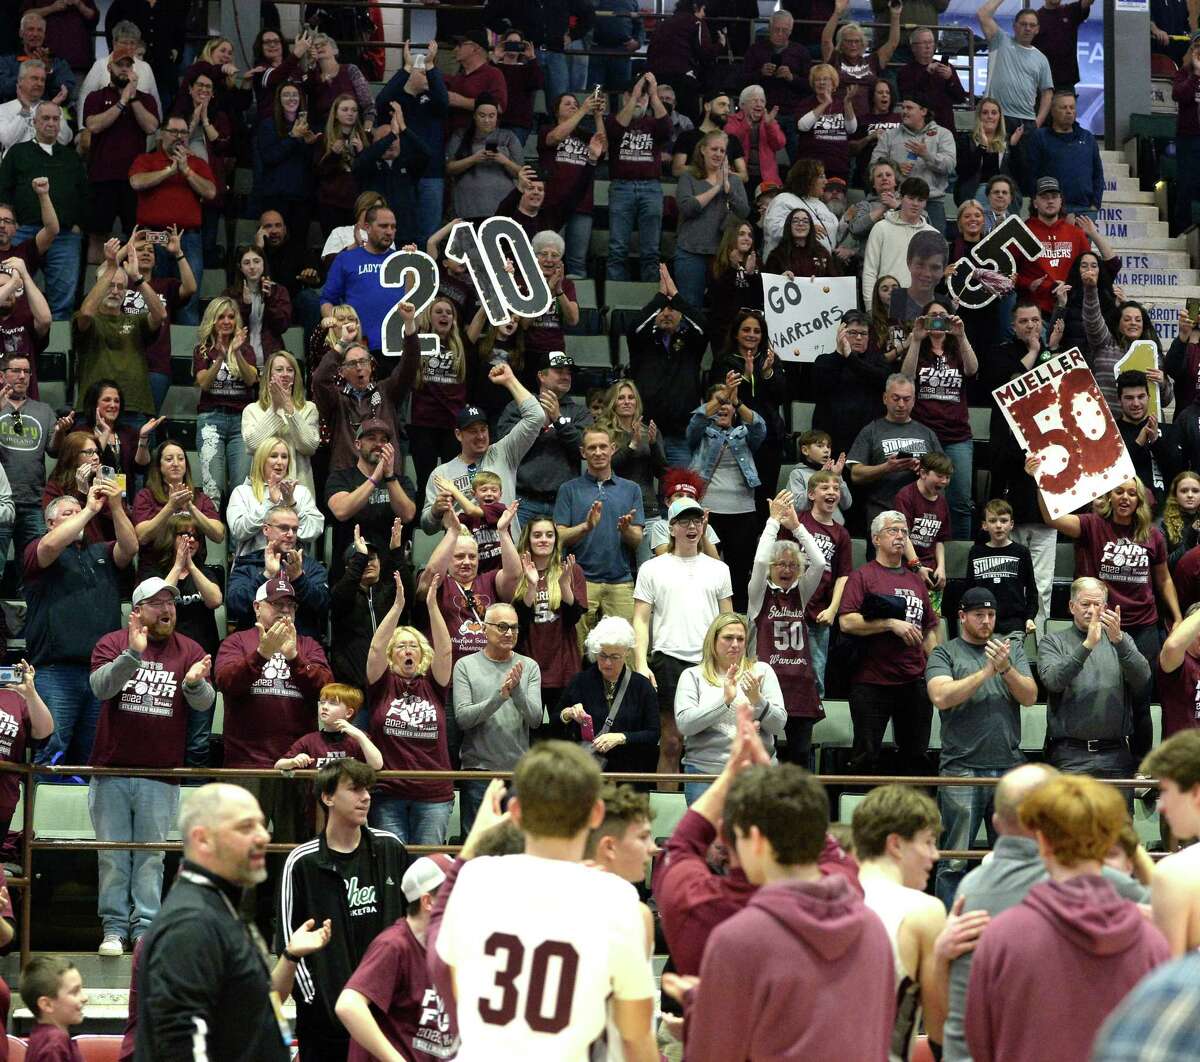 Stillwater boys basketball fans clap for their team following the boys’ victory over Salamanca in their Class C state semifinal at Cool Insuring Arena in Glens Falls, N.Y., on Friday, Mar. 18, 2022. (Jenn March, Special to the Times Union)